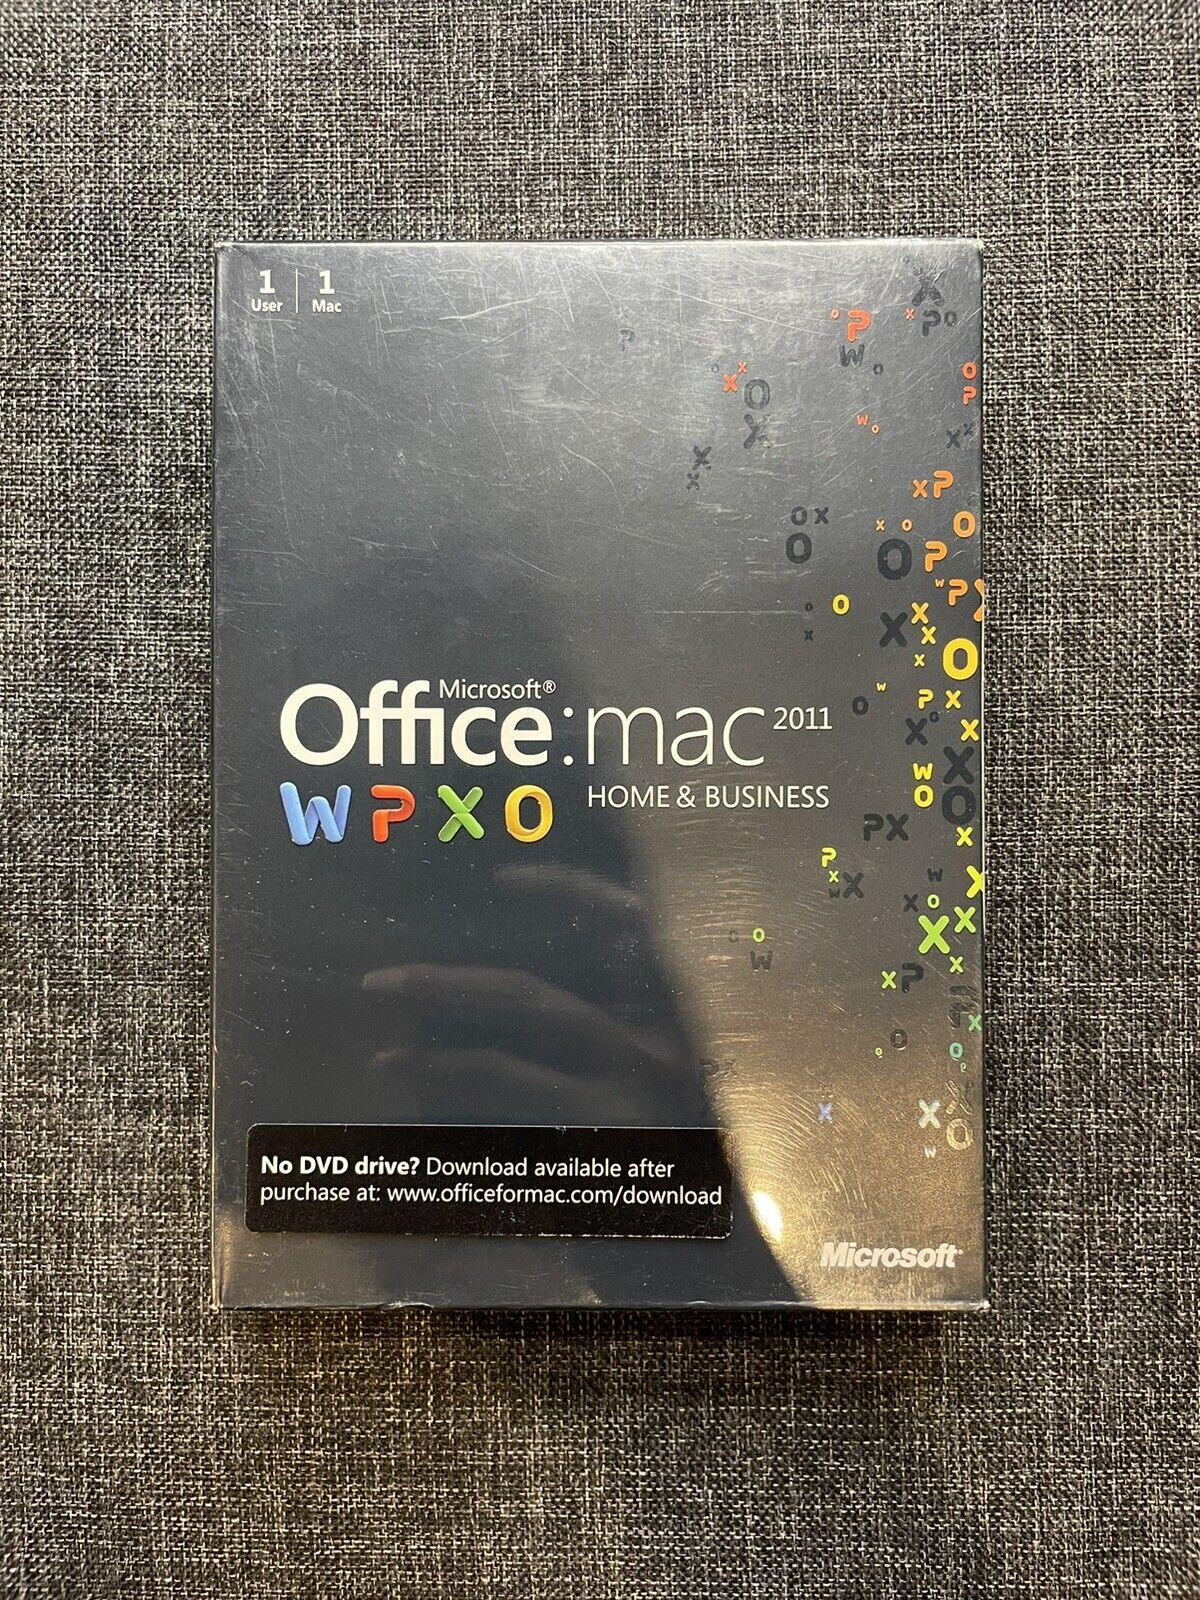 Microsoft Office Mac Home & Business 2011 DVD Brand New Sealed